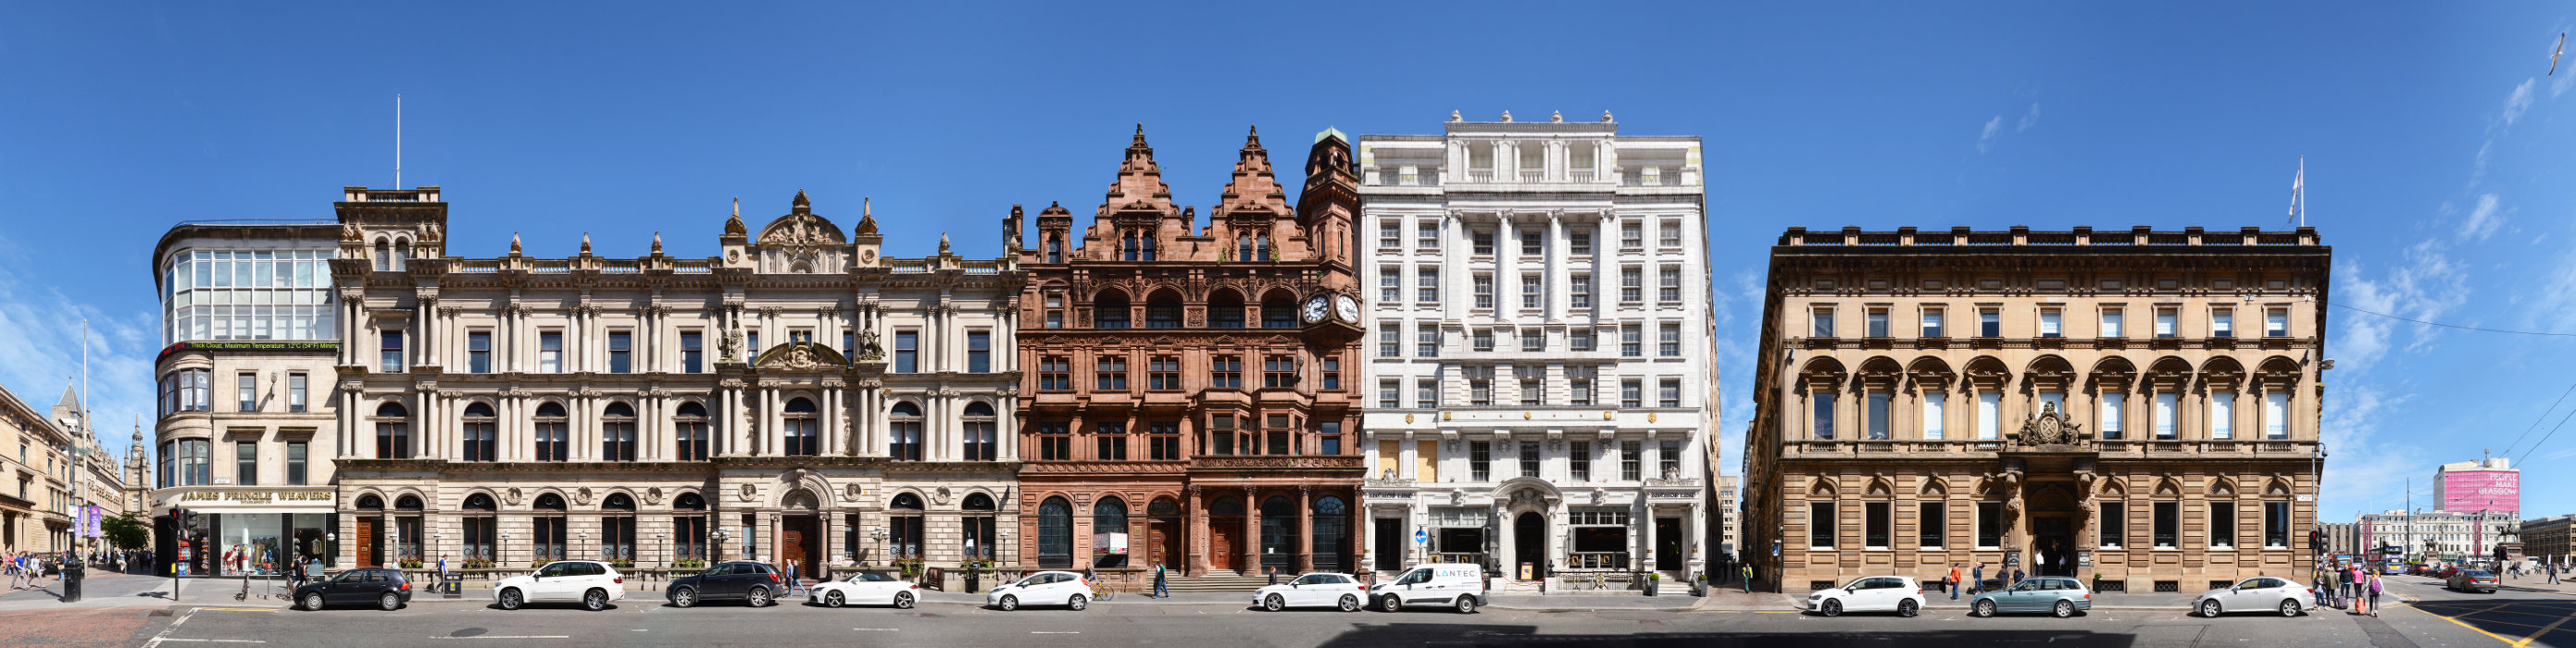 Counting House to Buchanan Street in Glasgow, Saint Vincent Place